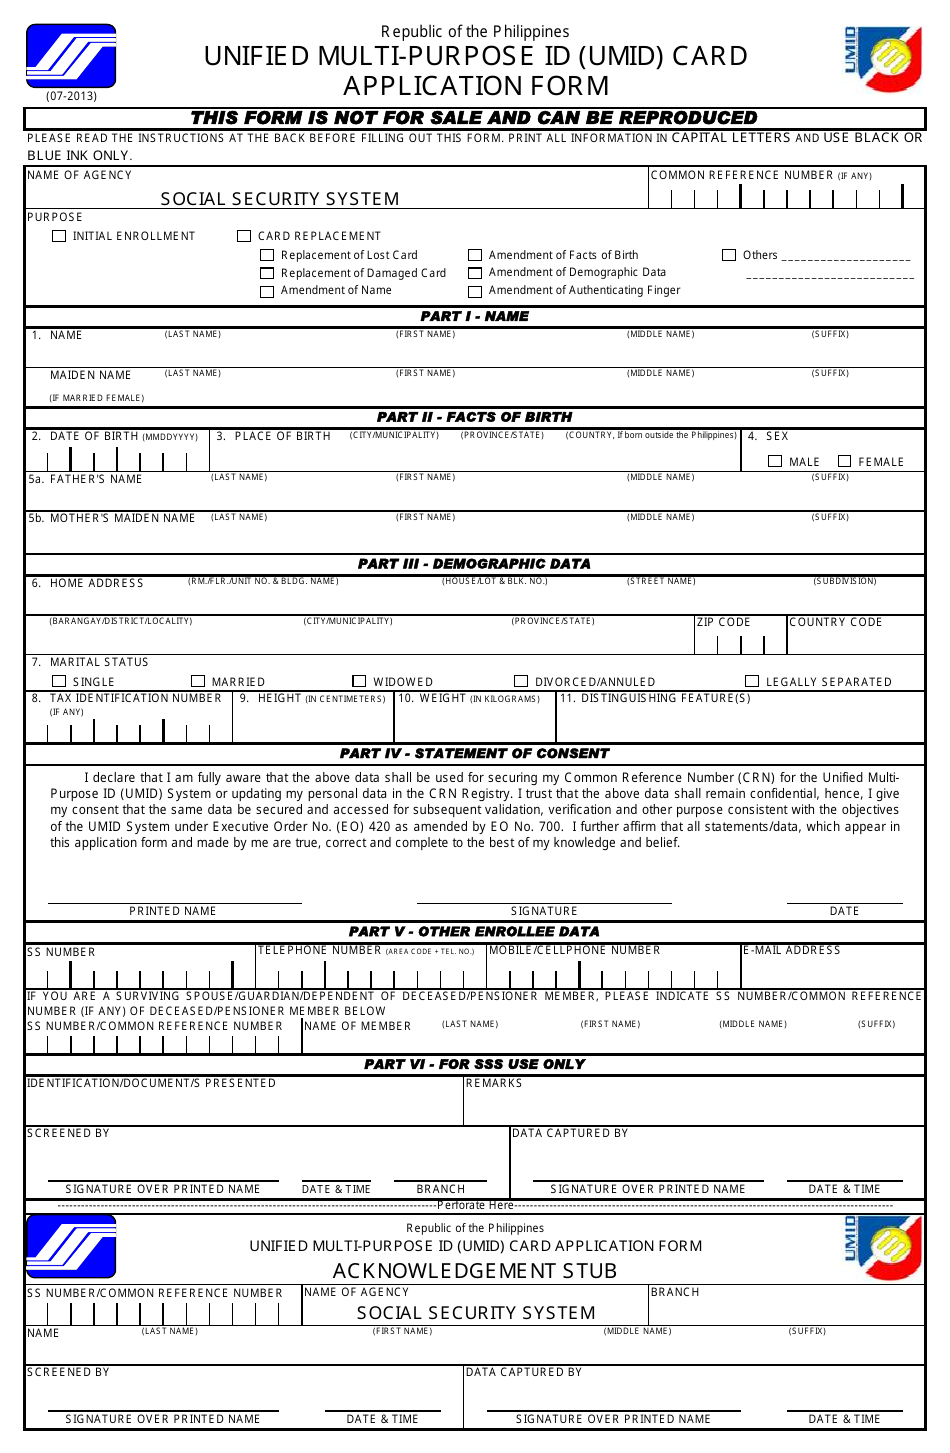 Unified Multi-Purpose ID (Umid) Card Application Form - Philippines, Page 1